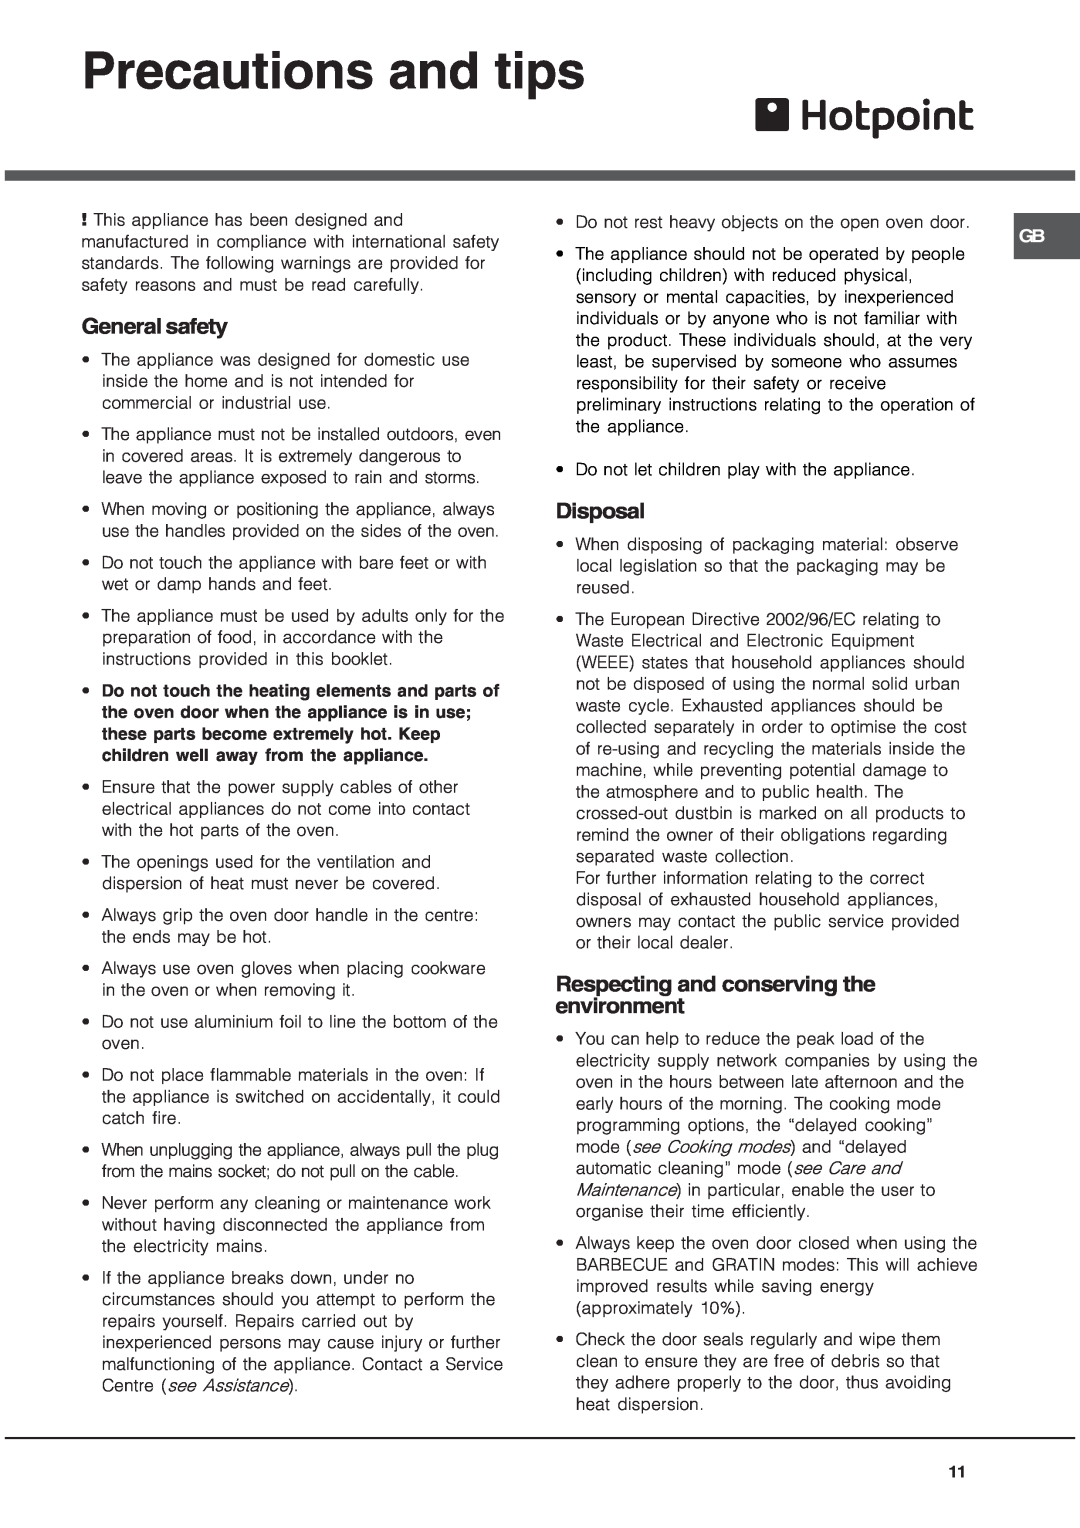 Hotpoint SE101PGX manual Precautions and tips, General safety, Disposal, Respecting and conserving the environment 